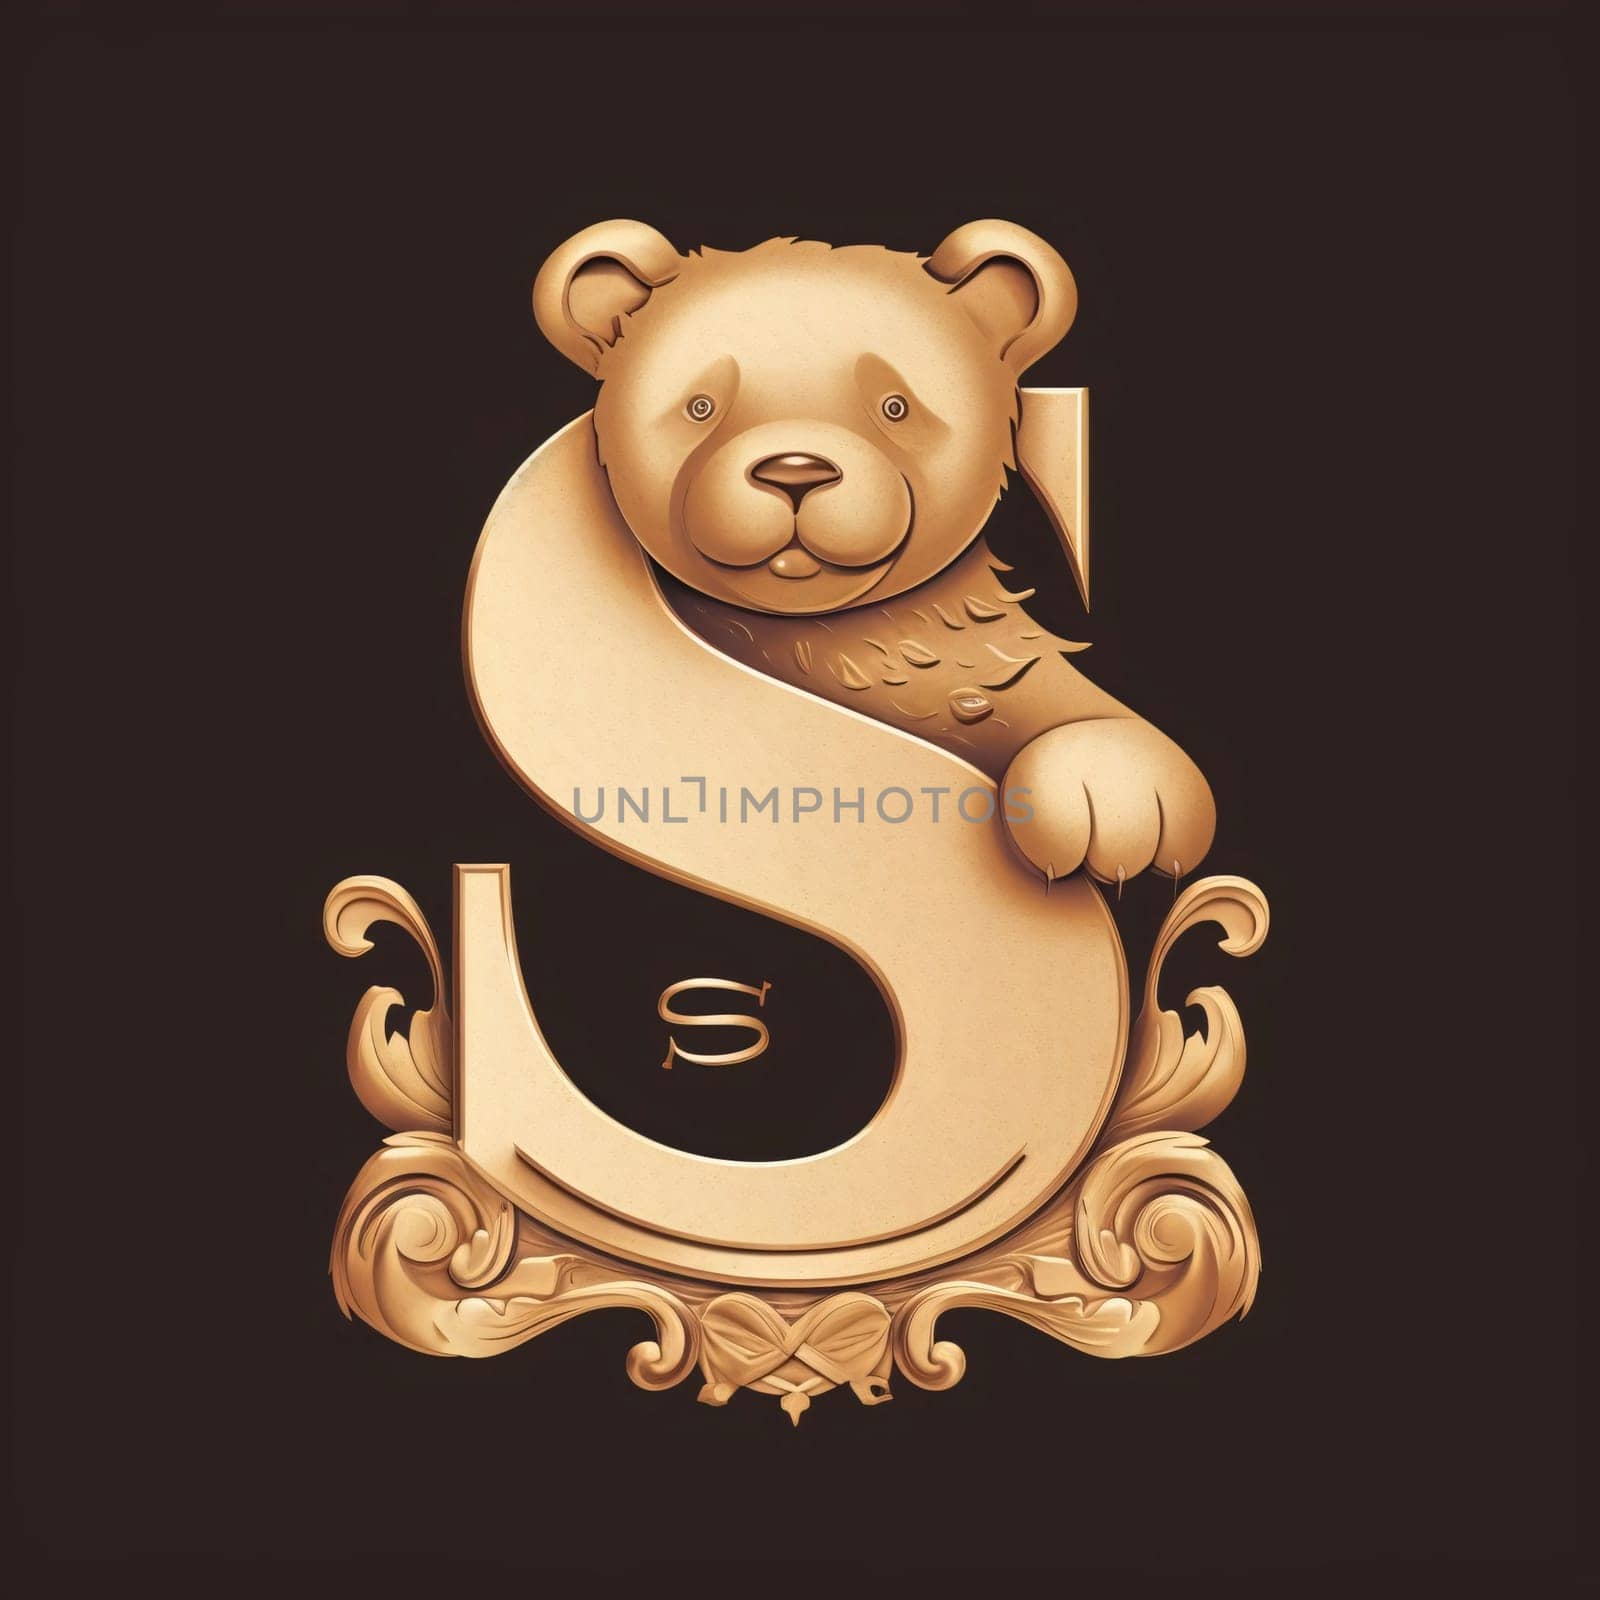 Letter S with teddy bear. 3D illustration. Vintage style. by ThemesS